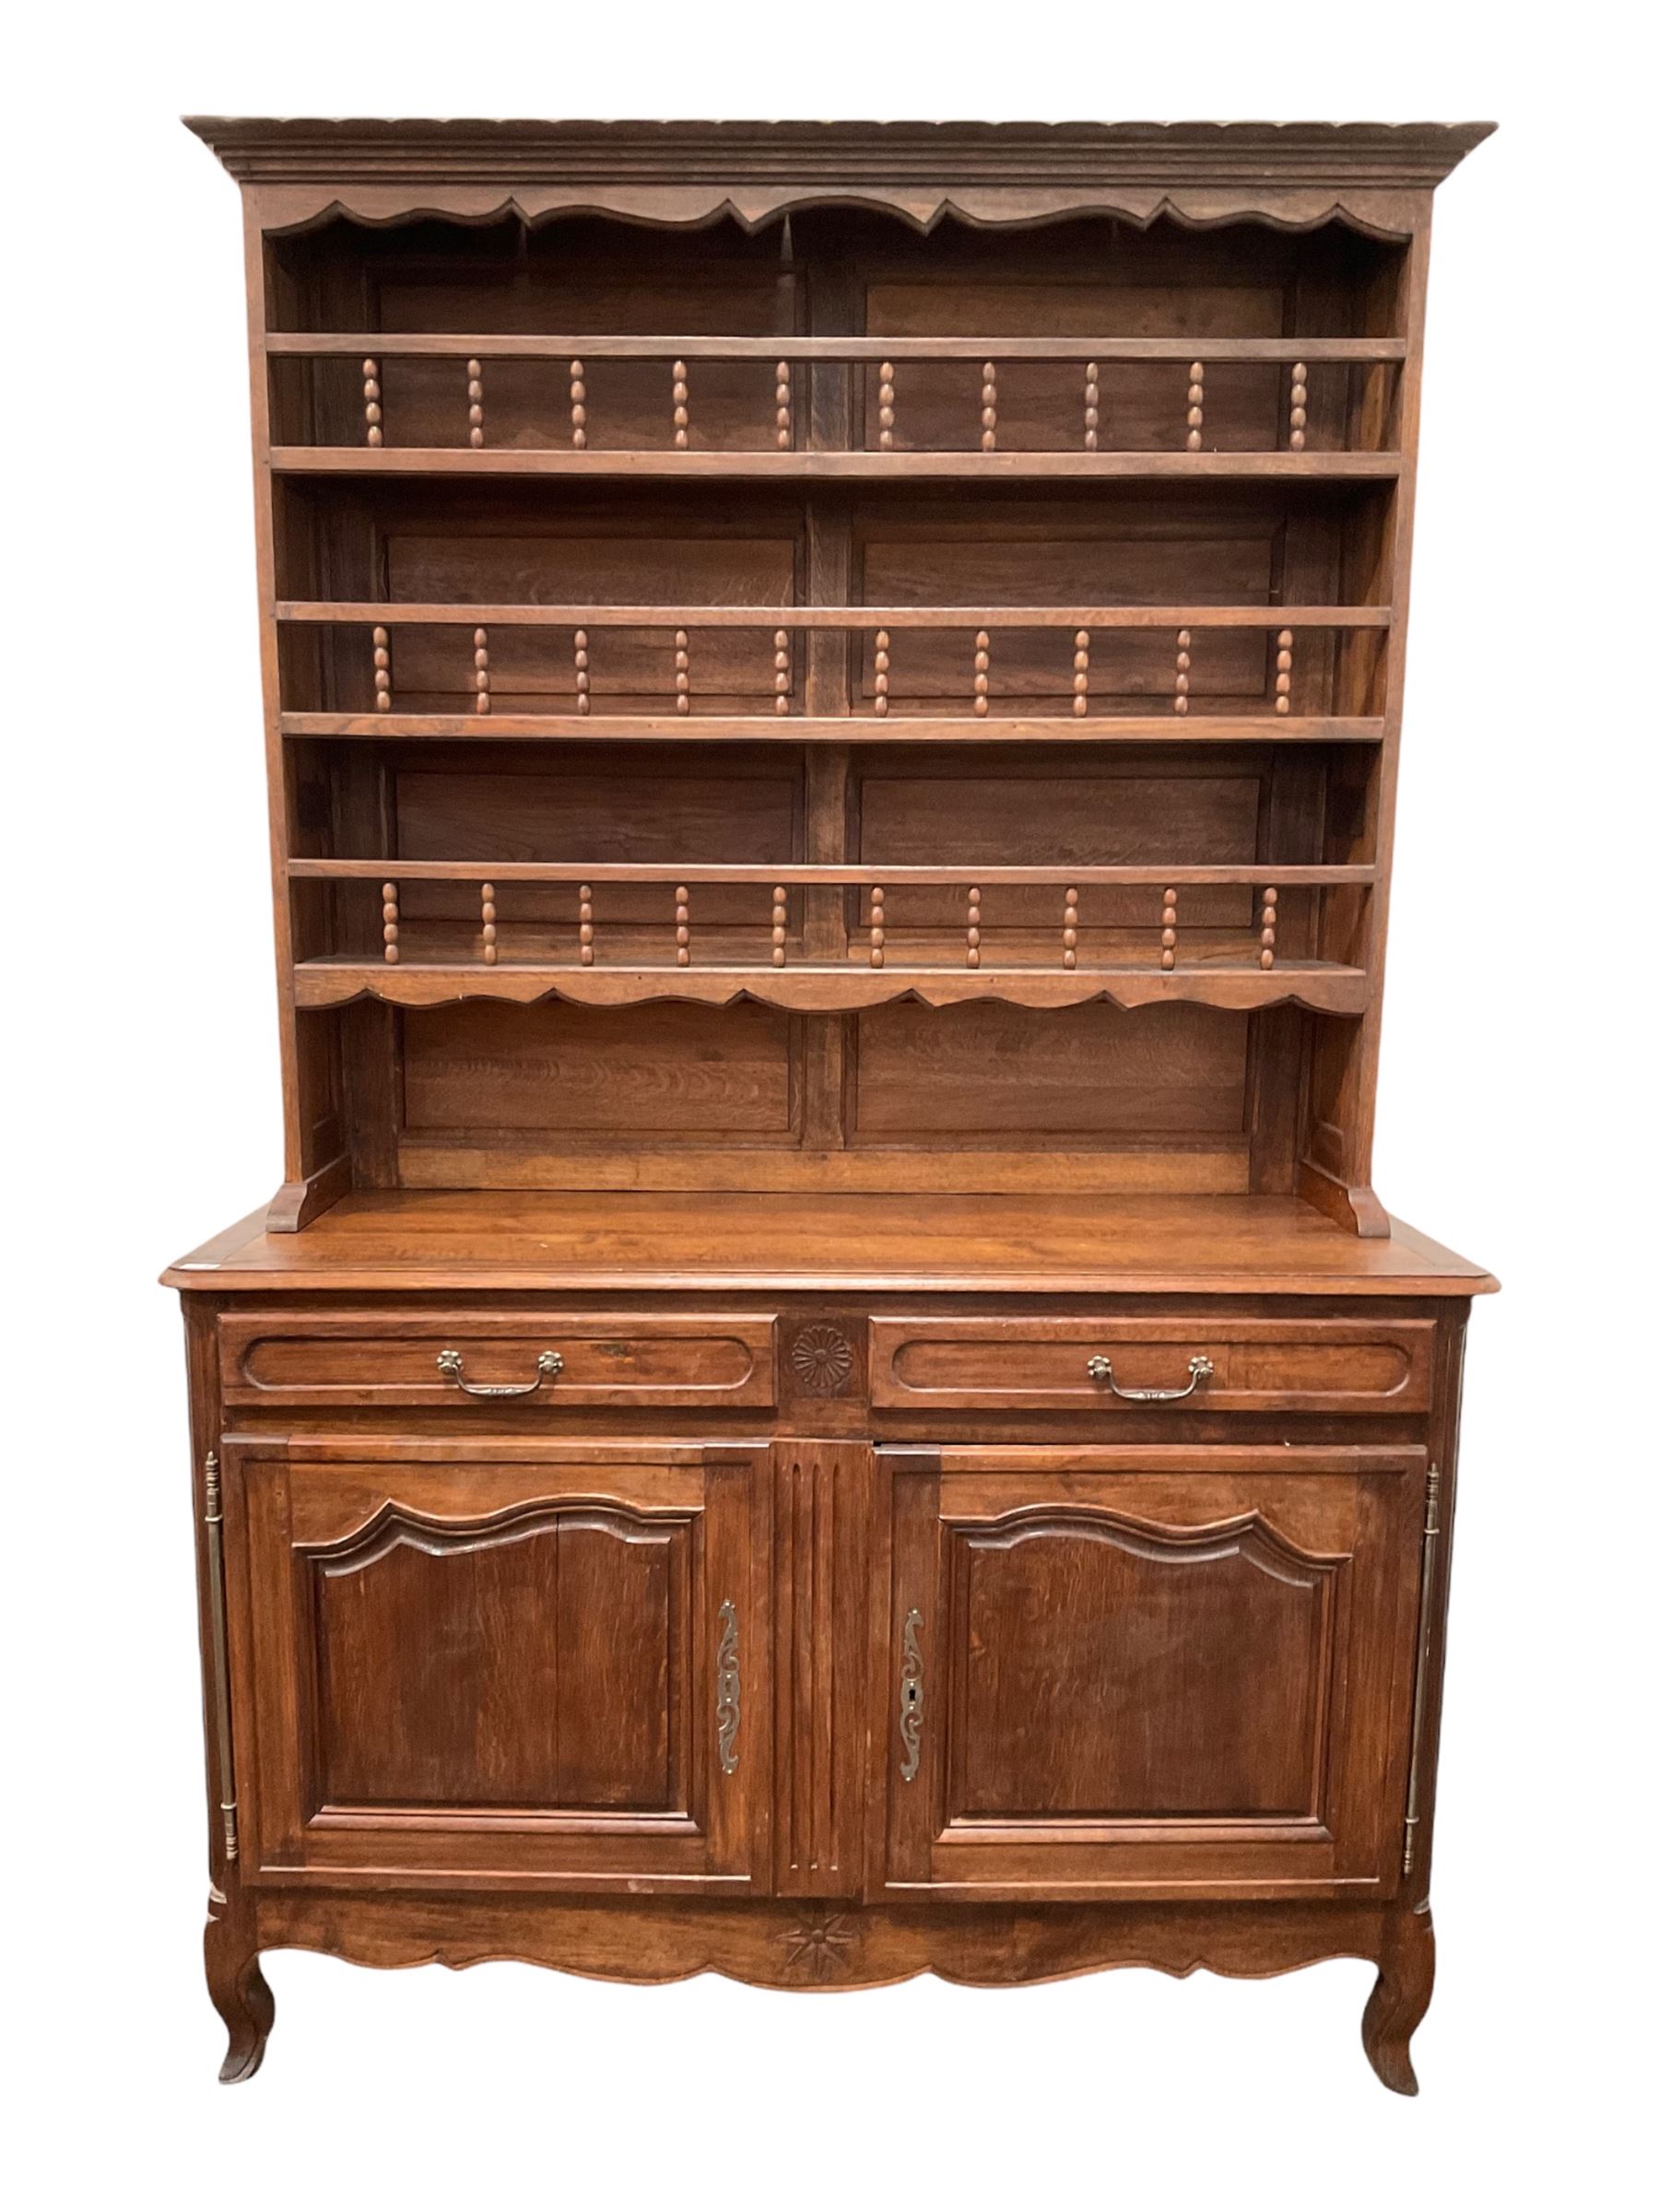 Mid to late 20th century French oak dresser